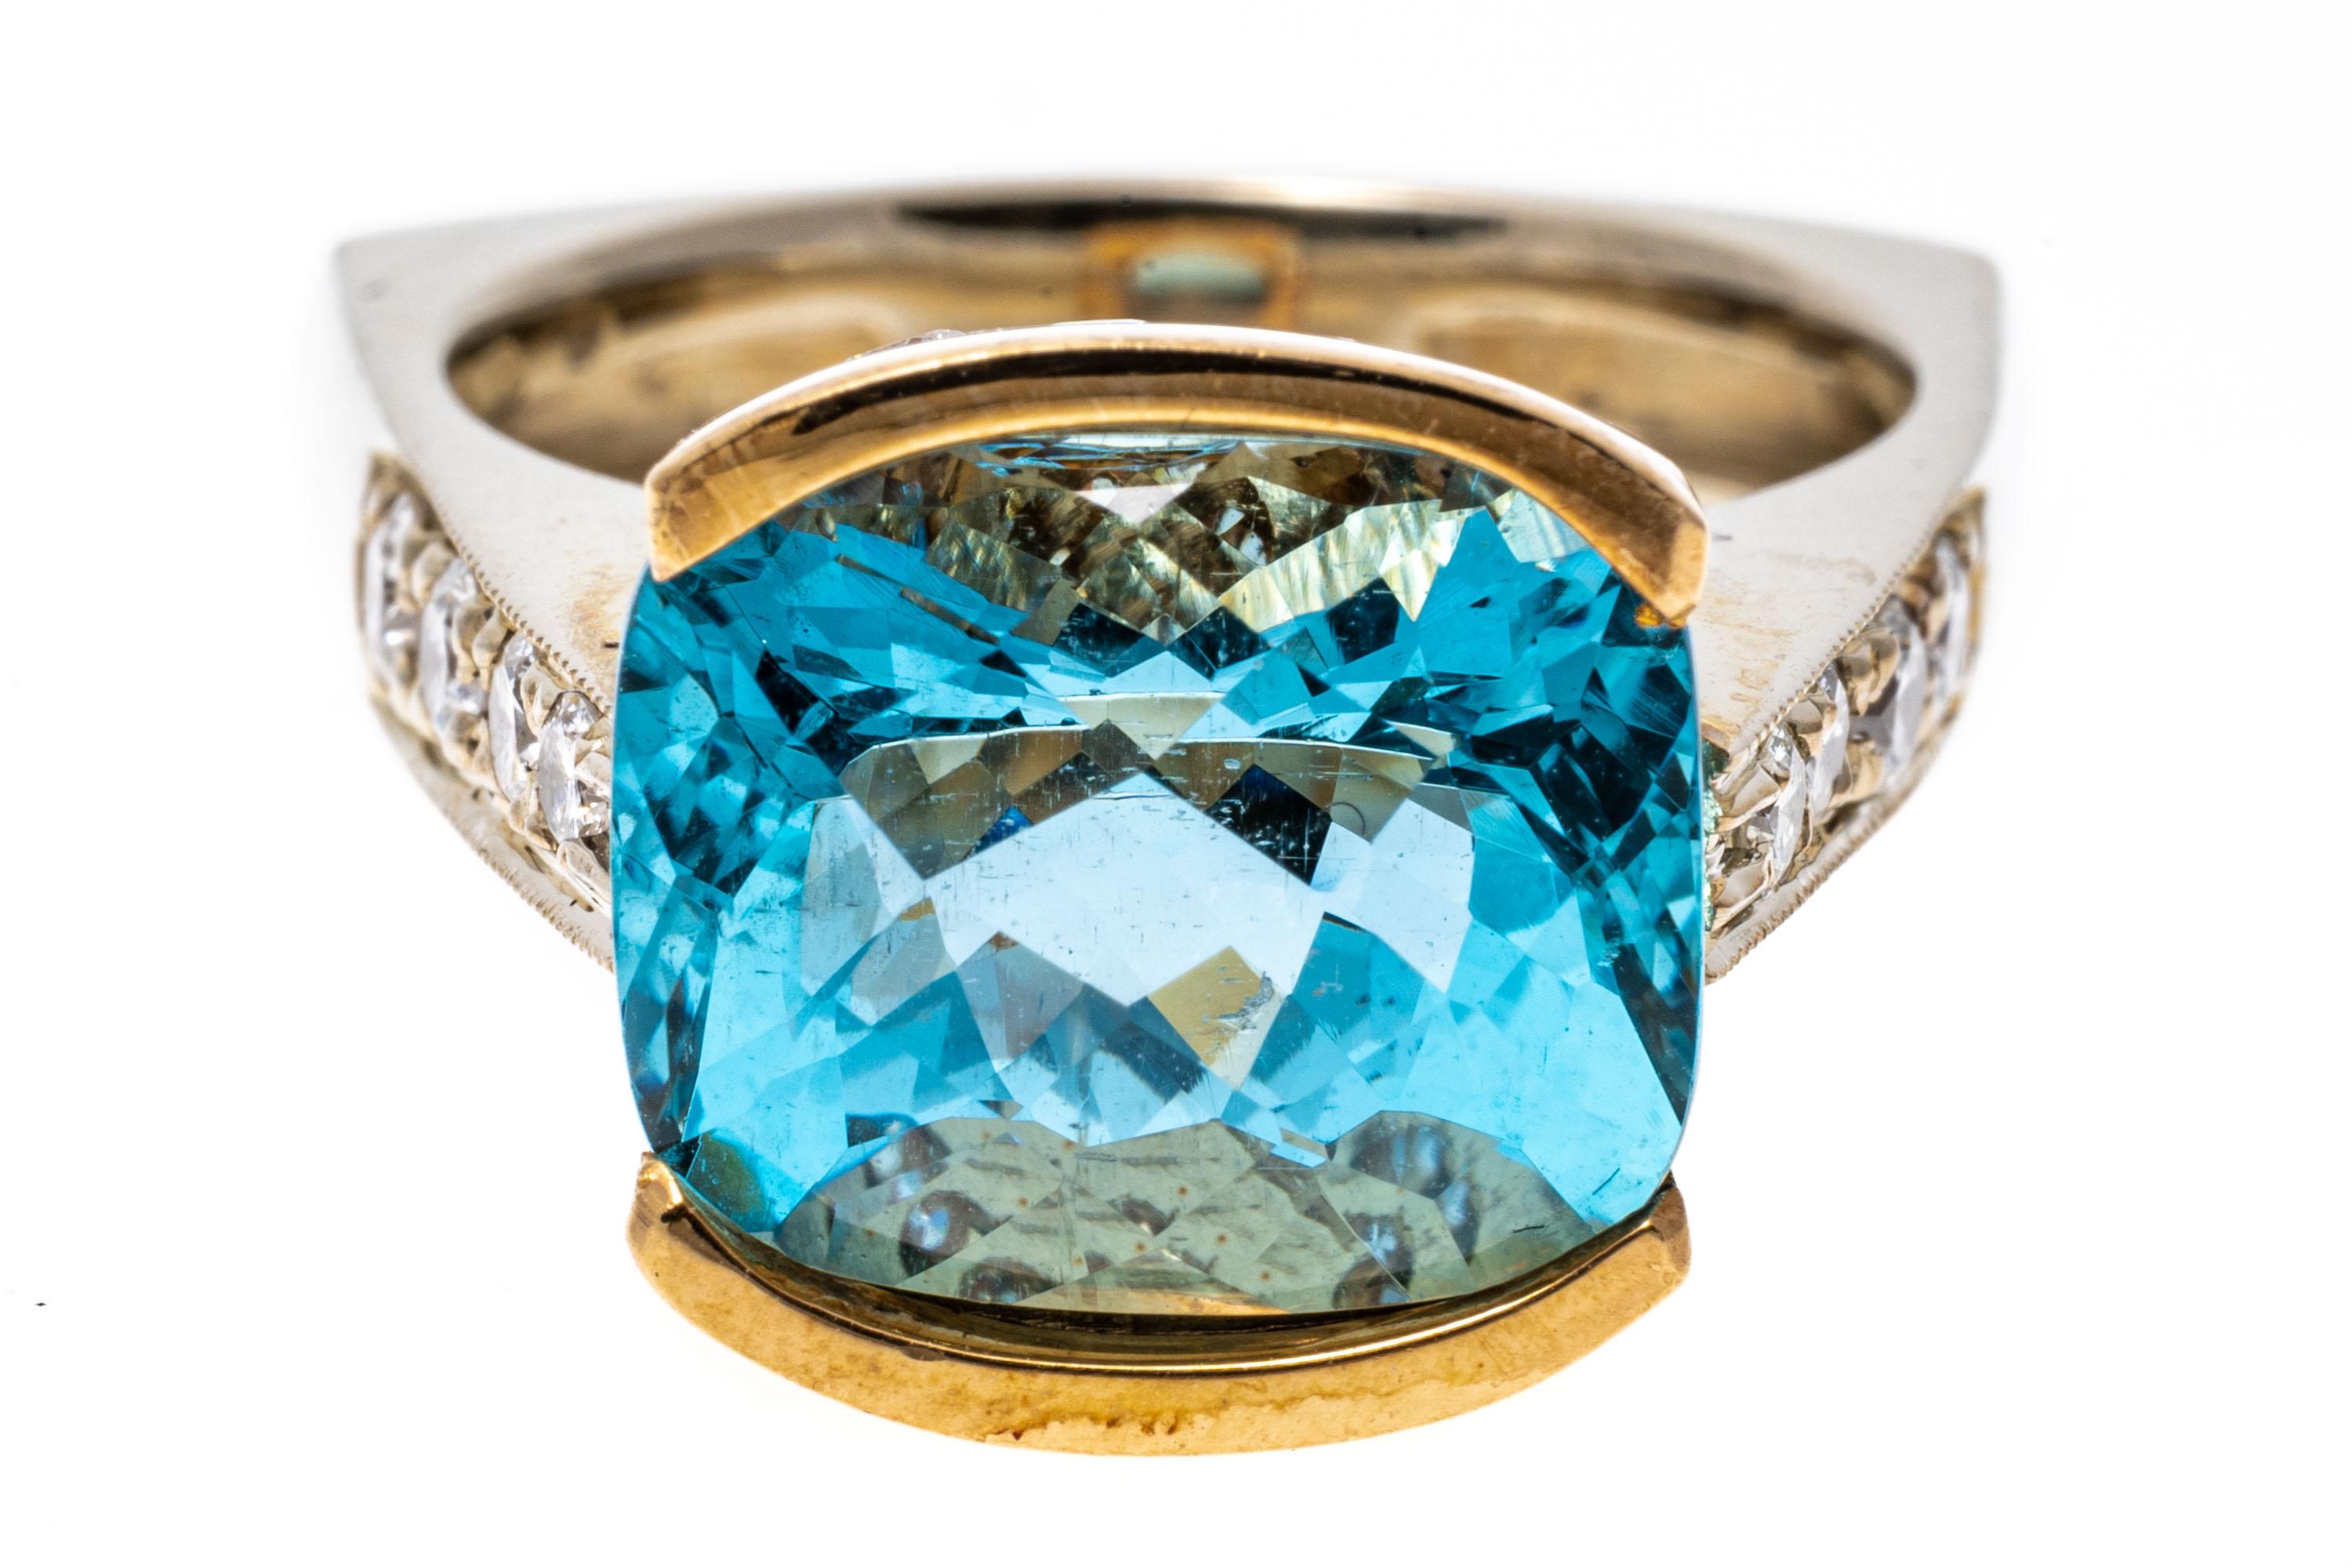 12k rose and white gold ring. This gorgeous ring has a center, checkerboard cushion faceted, medium blue color aquamarine, approximately 6.16 CTS, set in a rose gold half bezel, decorated at the bottom of the gallery with round faceted diamonds.